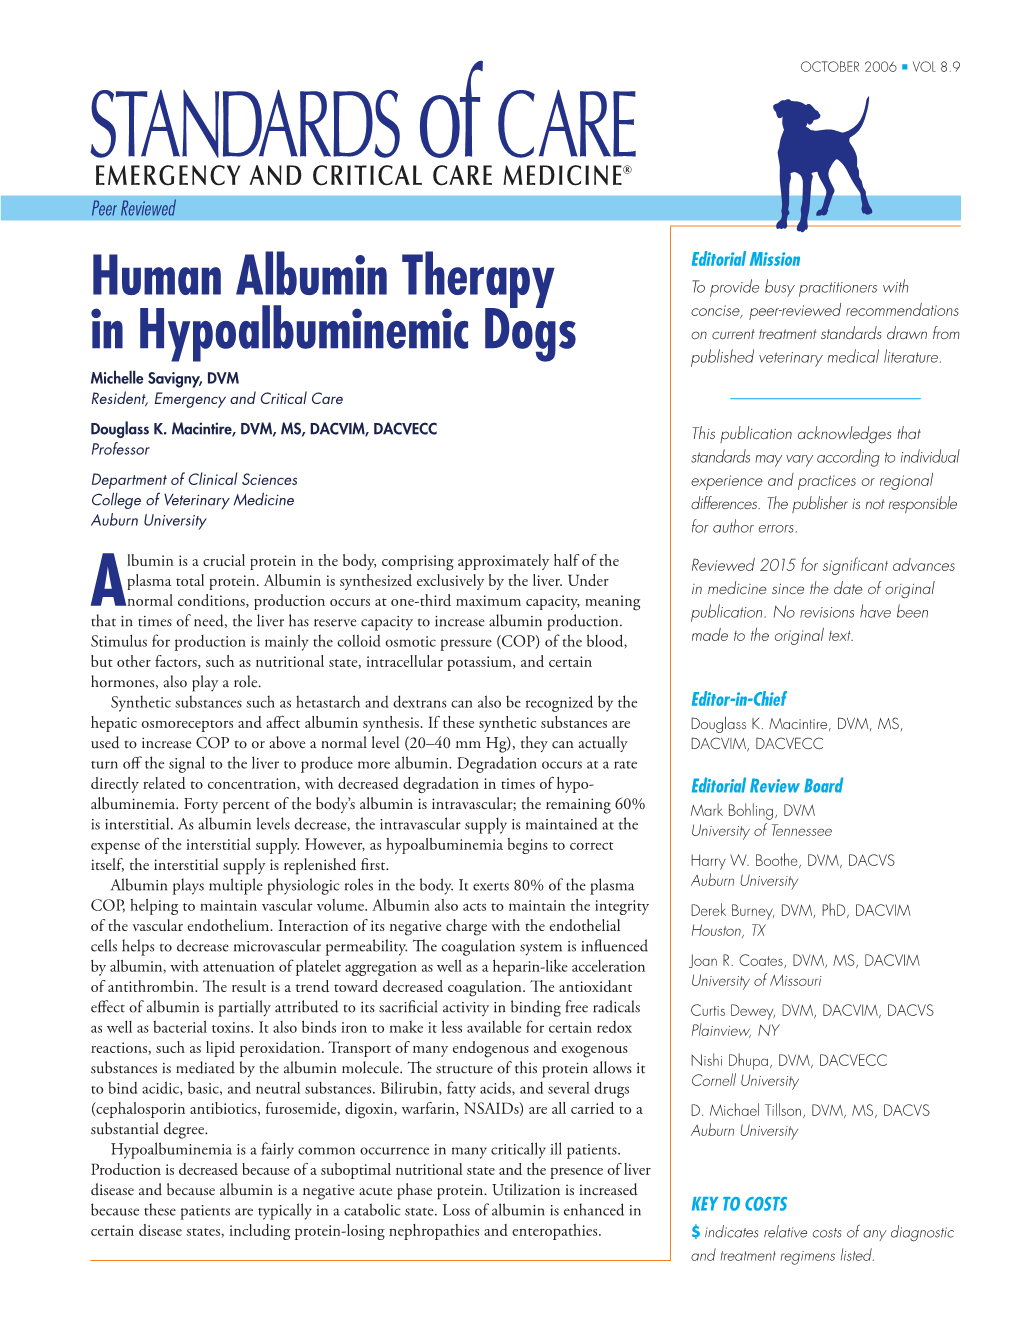 Human Albumin Therapy in Hypoalbuminemic Dogs